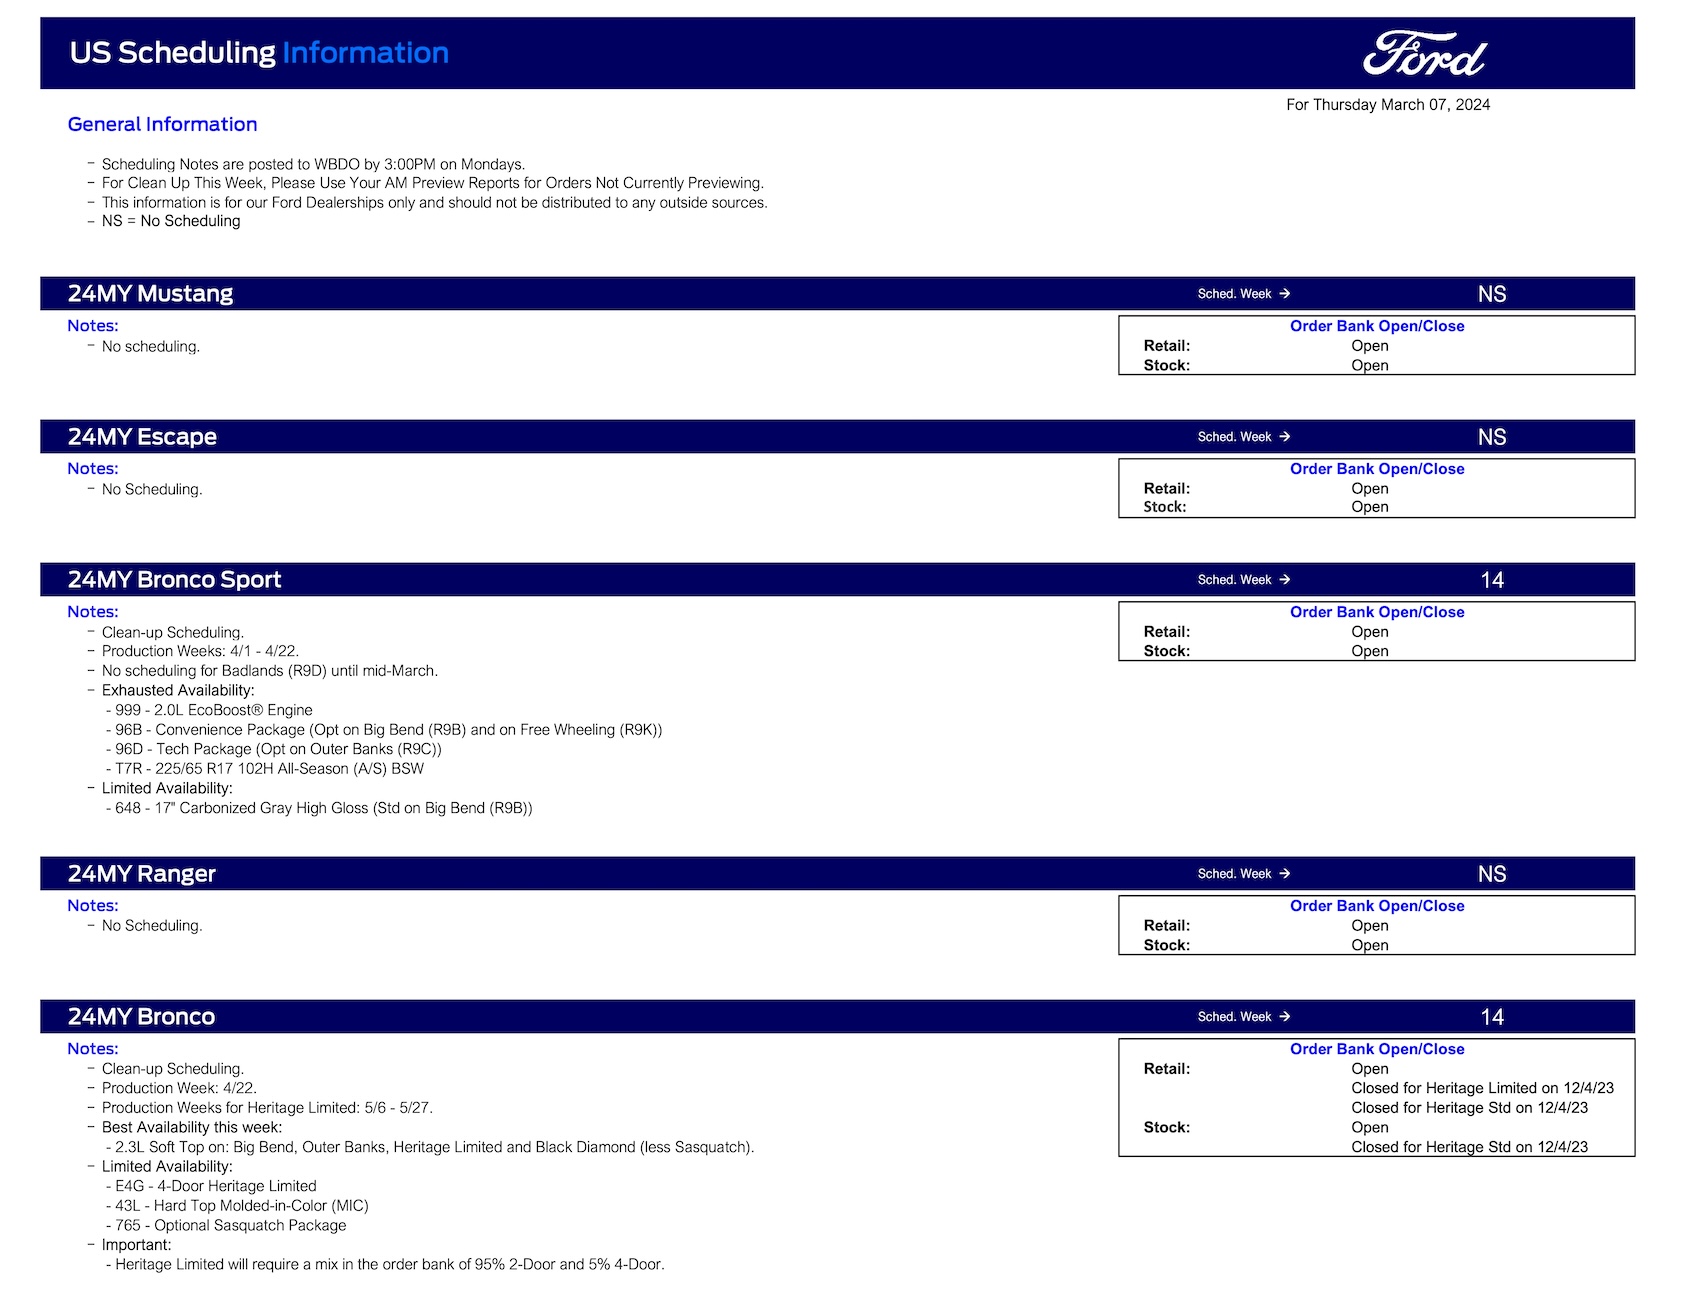 S650 Mustang 2024 Mustang No Scheduling This Week (3/7/24) Ford Scheduling Notes - 3.4.24-1